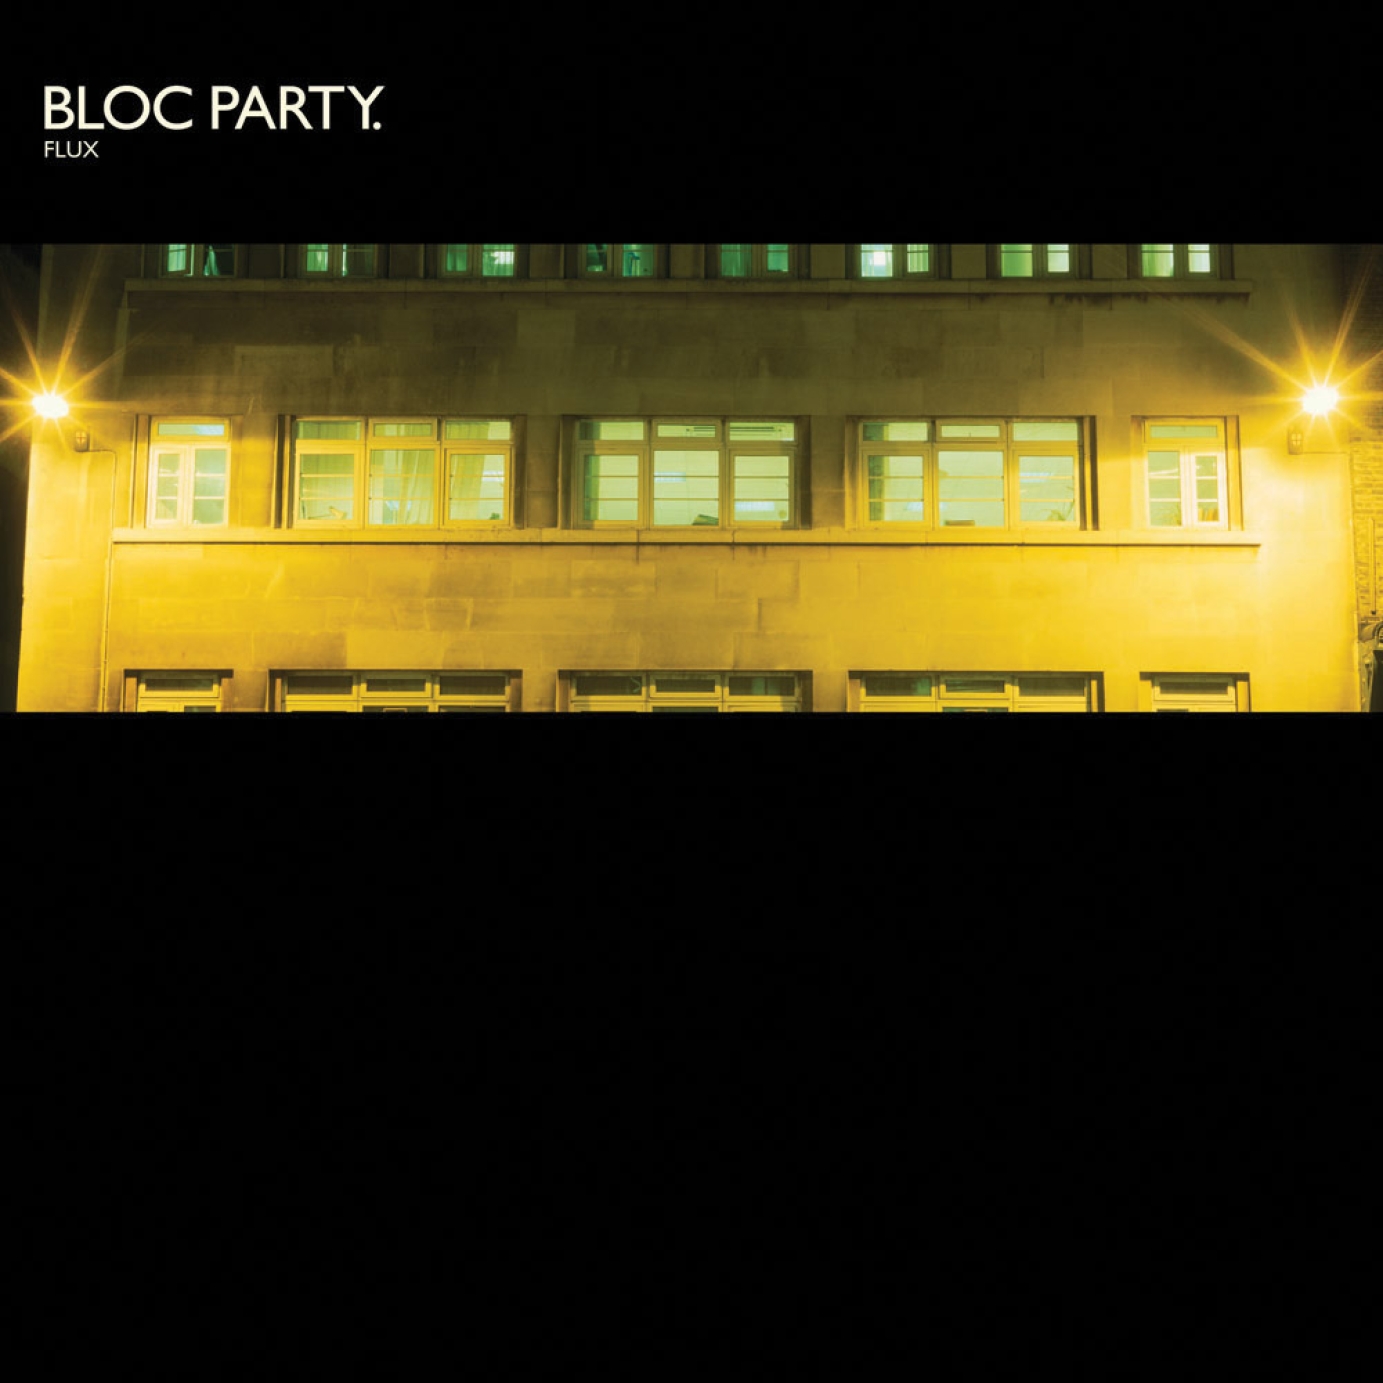 Graphic design for Bloc Party by robcranedesign